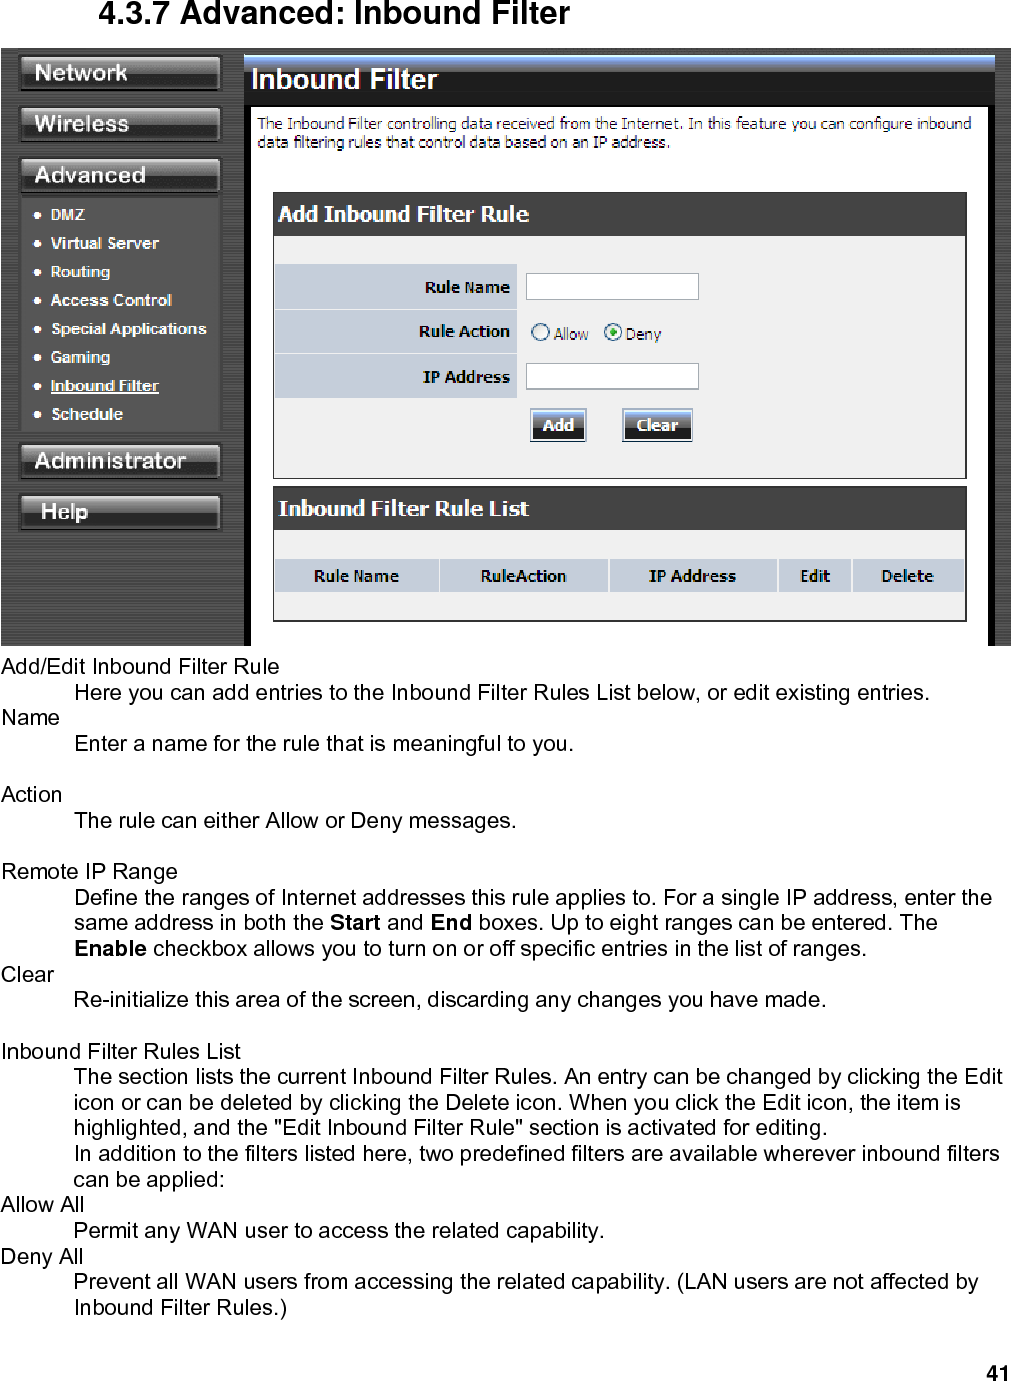 41 4.3.7 Advanced: Inbound Filter  Add/Edit Inbound Filter Rule   Here you can add entries to the Inbound Filter Rules List below, or edit existing entries.   Name  Enter a name for the rule that is meaningful to you.    Action  The rule can either Allow or Deny messages.    Remote IP Range   Define the ranges of Internet addresses this rule applies to. For a single IP address, enter the same address in both the Start and End boxes. Up to eight ranges can be entered. The Enable checkbox allows you to turn on or off specific entries in the list of ranges.   Clear  Re-initialize this area of the screen, discarding any changes you have made.    Inbound Filter Rules List   The section lists the current Inbound Filter Rules. An entry can be changed by clicking the Edit icon or can be deleted by clicking the Delete icon. When you click the Edit icon, the item is highlighted, and the &quot;Edit Inbound Filter Rule&quot; section is activated for editing.   In addition to the filters listed here, two predefined filters are available wherever inbound filters can be applied:   Allow All   Permit any WAN user to access the related capability.   Deny All   Prevent all WAN users from accessing the related capability. (LAN users are not affected by Inbound Filter Rules.)   